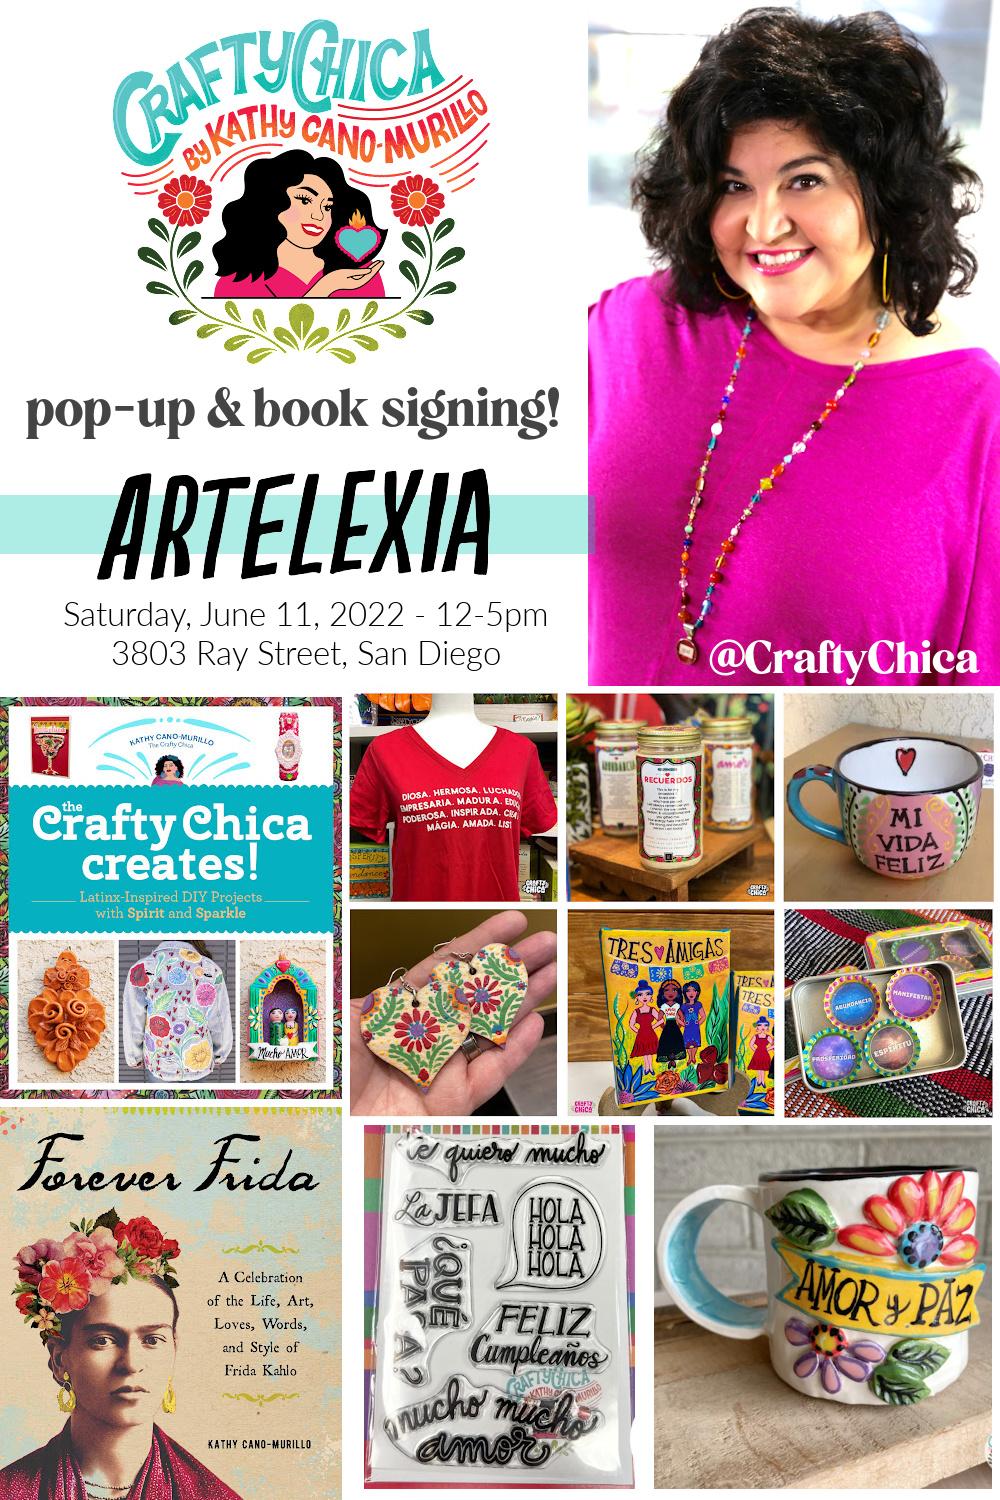 Crafty Chica at Artelexia